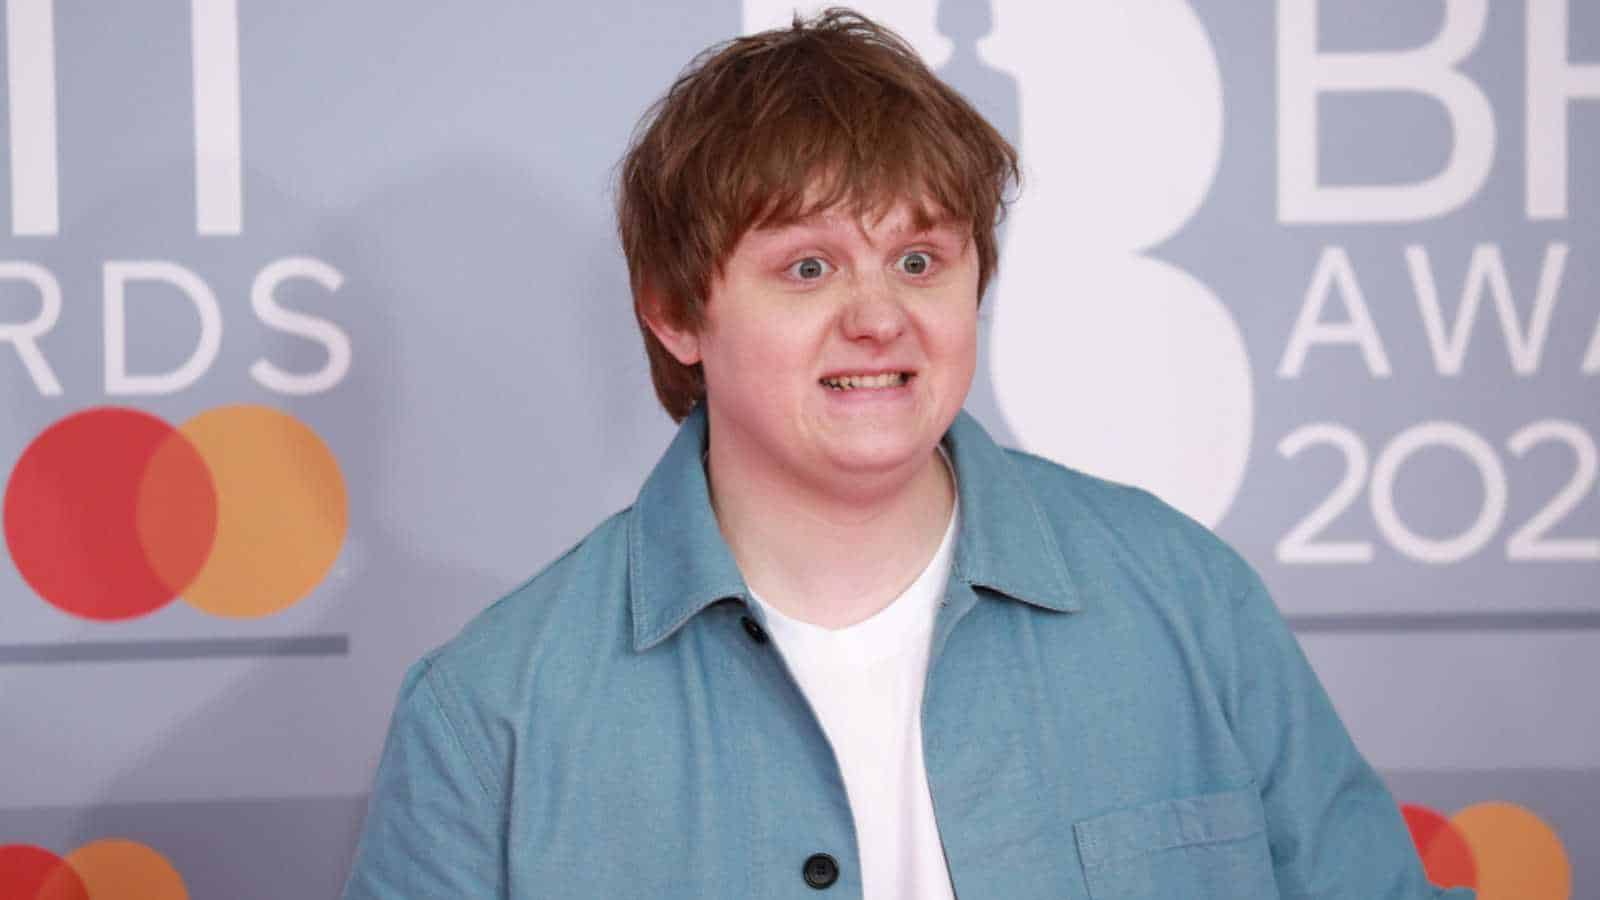 London, United Kingdom- February 18, 2020: Lewis Capaldi attends the Brit Awards at the 02 Arena in London, UK.
